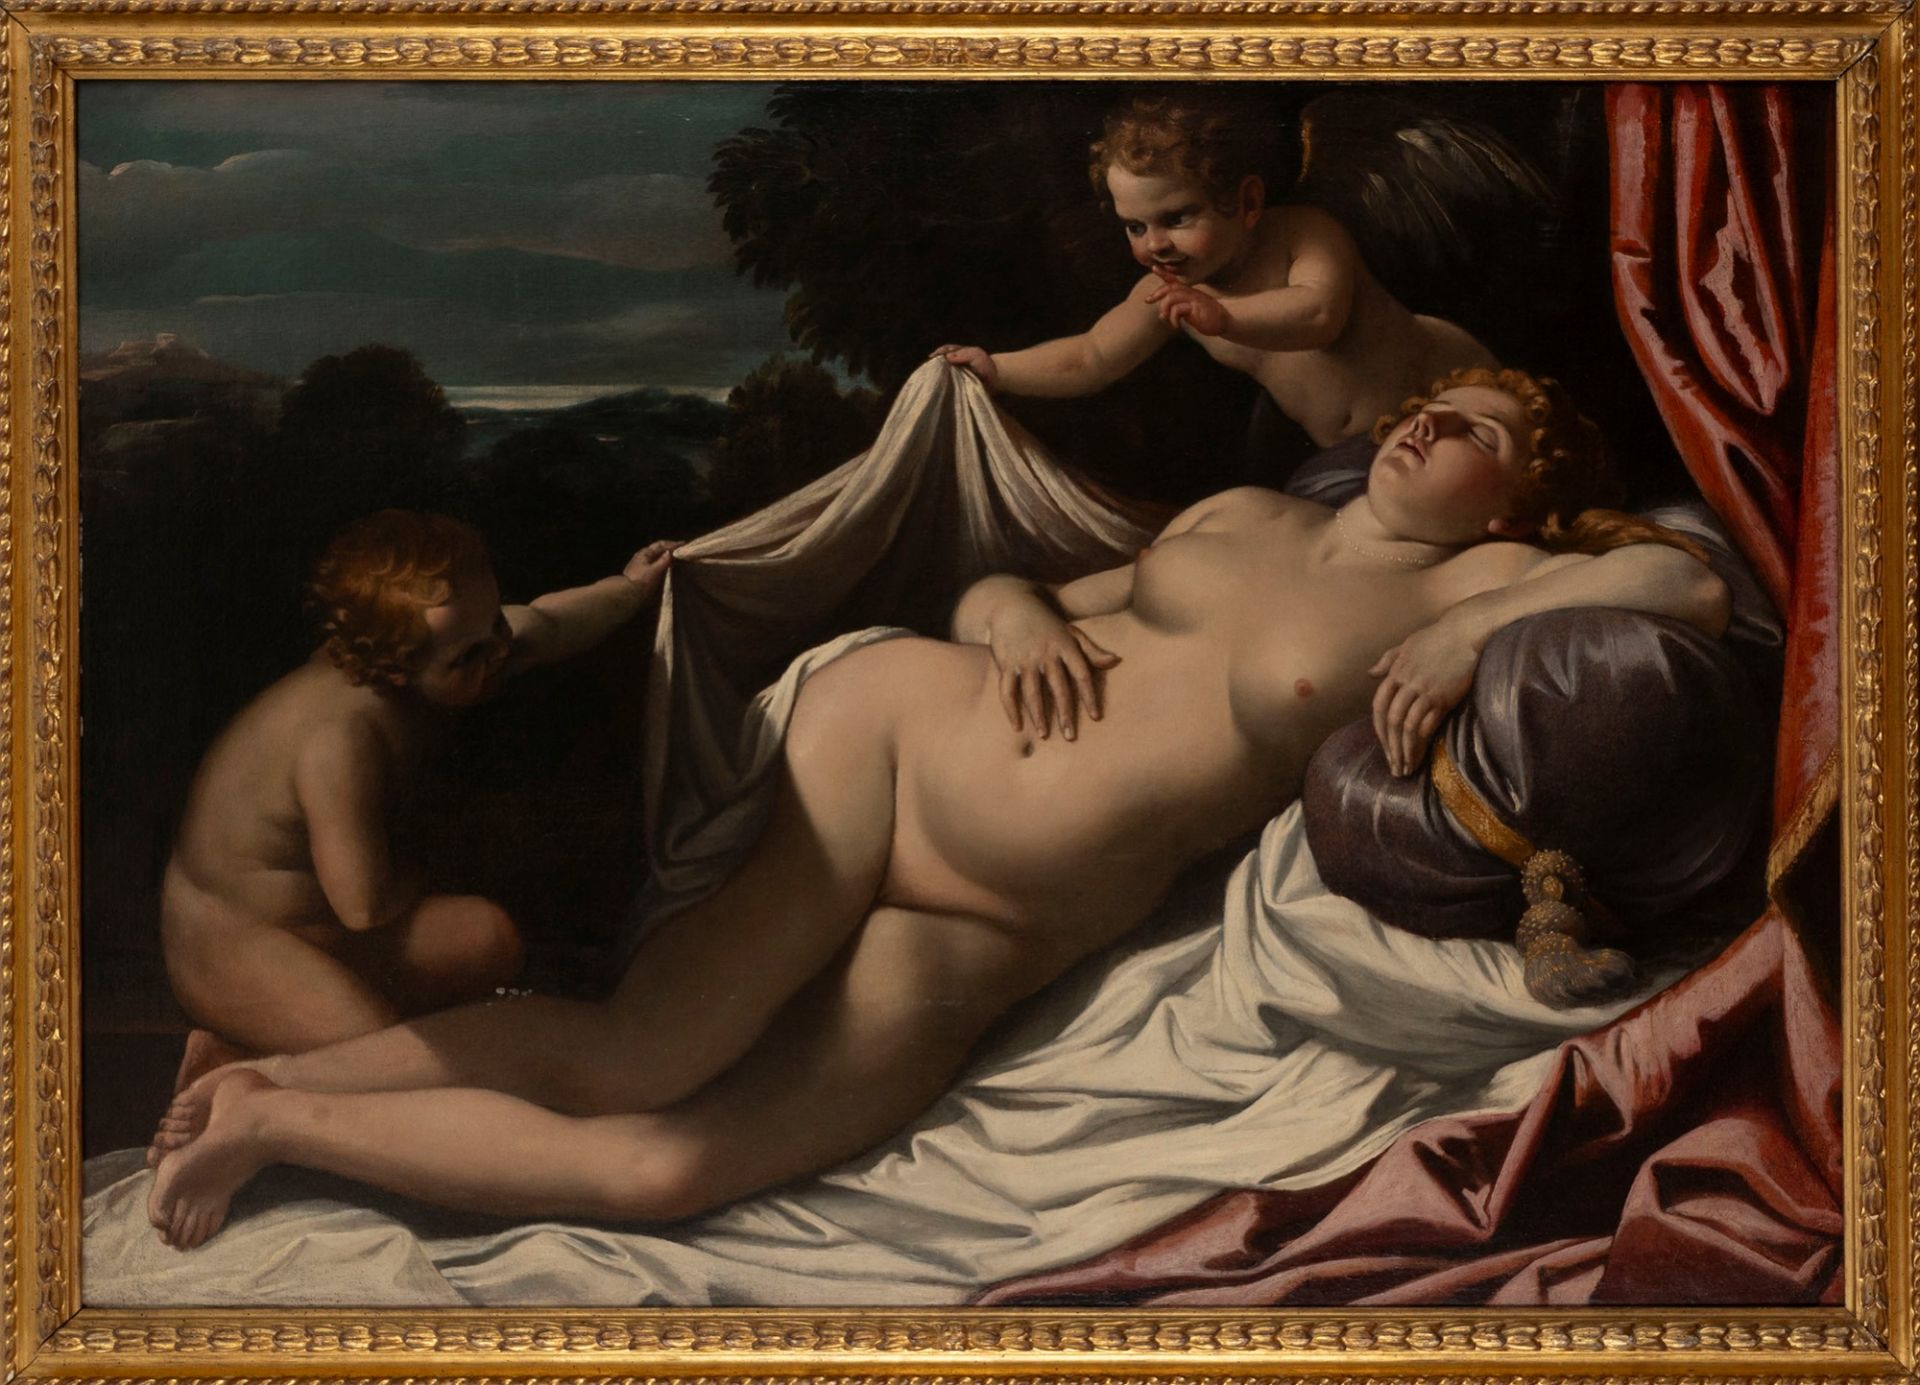 Attributed to Giovanni Lanfranco (Parma, 1582 – Rome, 1647) - Sleeping Venus with two cupids - Image 2 of 5